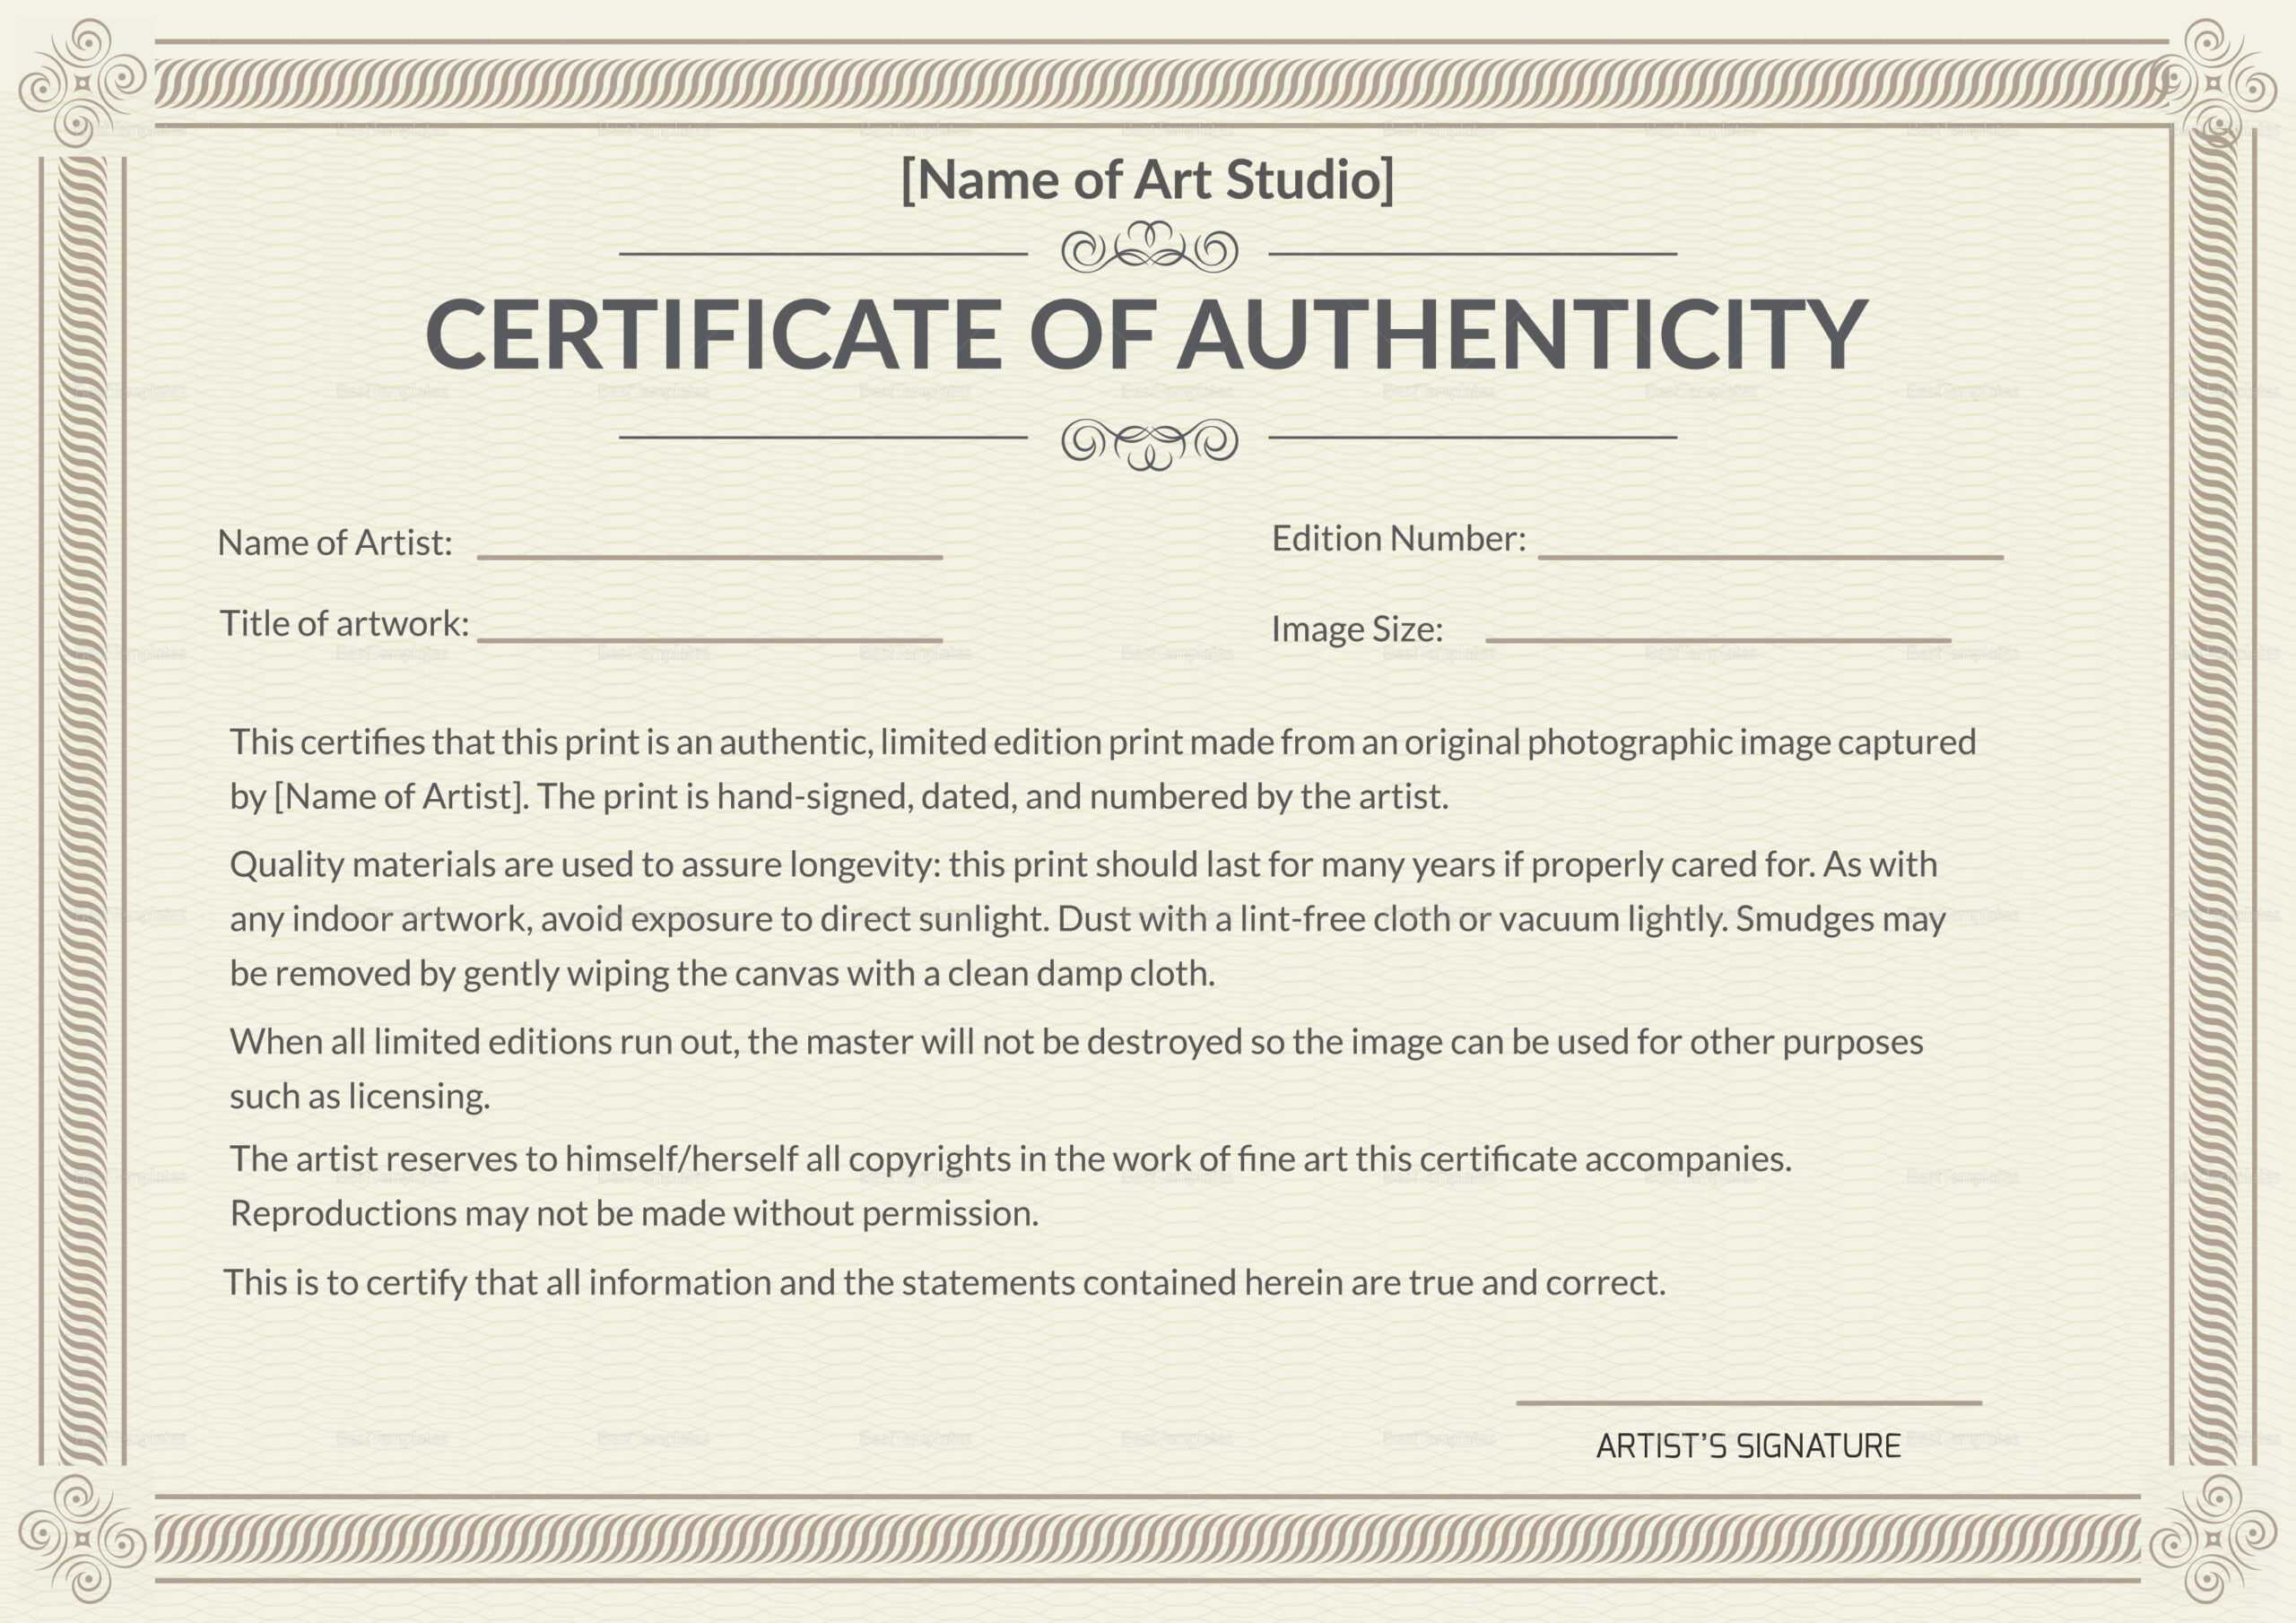 Certificate Templates: Template Certificate Of Authenticity With Regard To Photography Certificate Of Authenticity Template